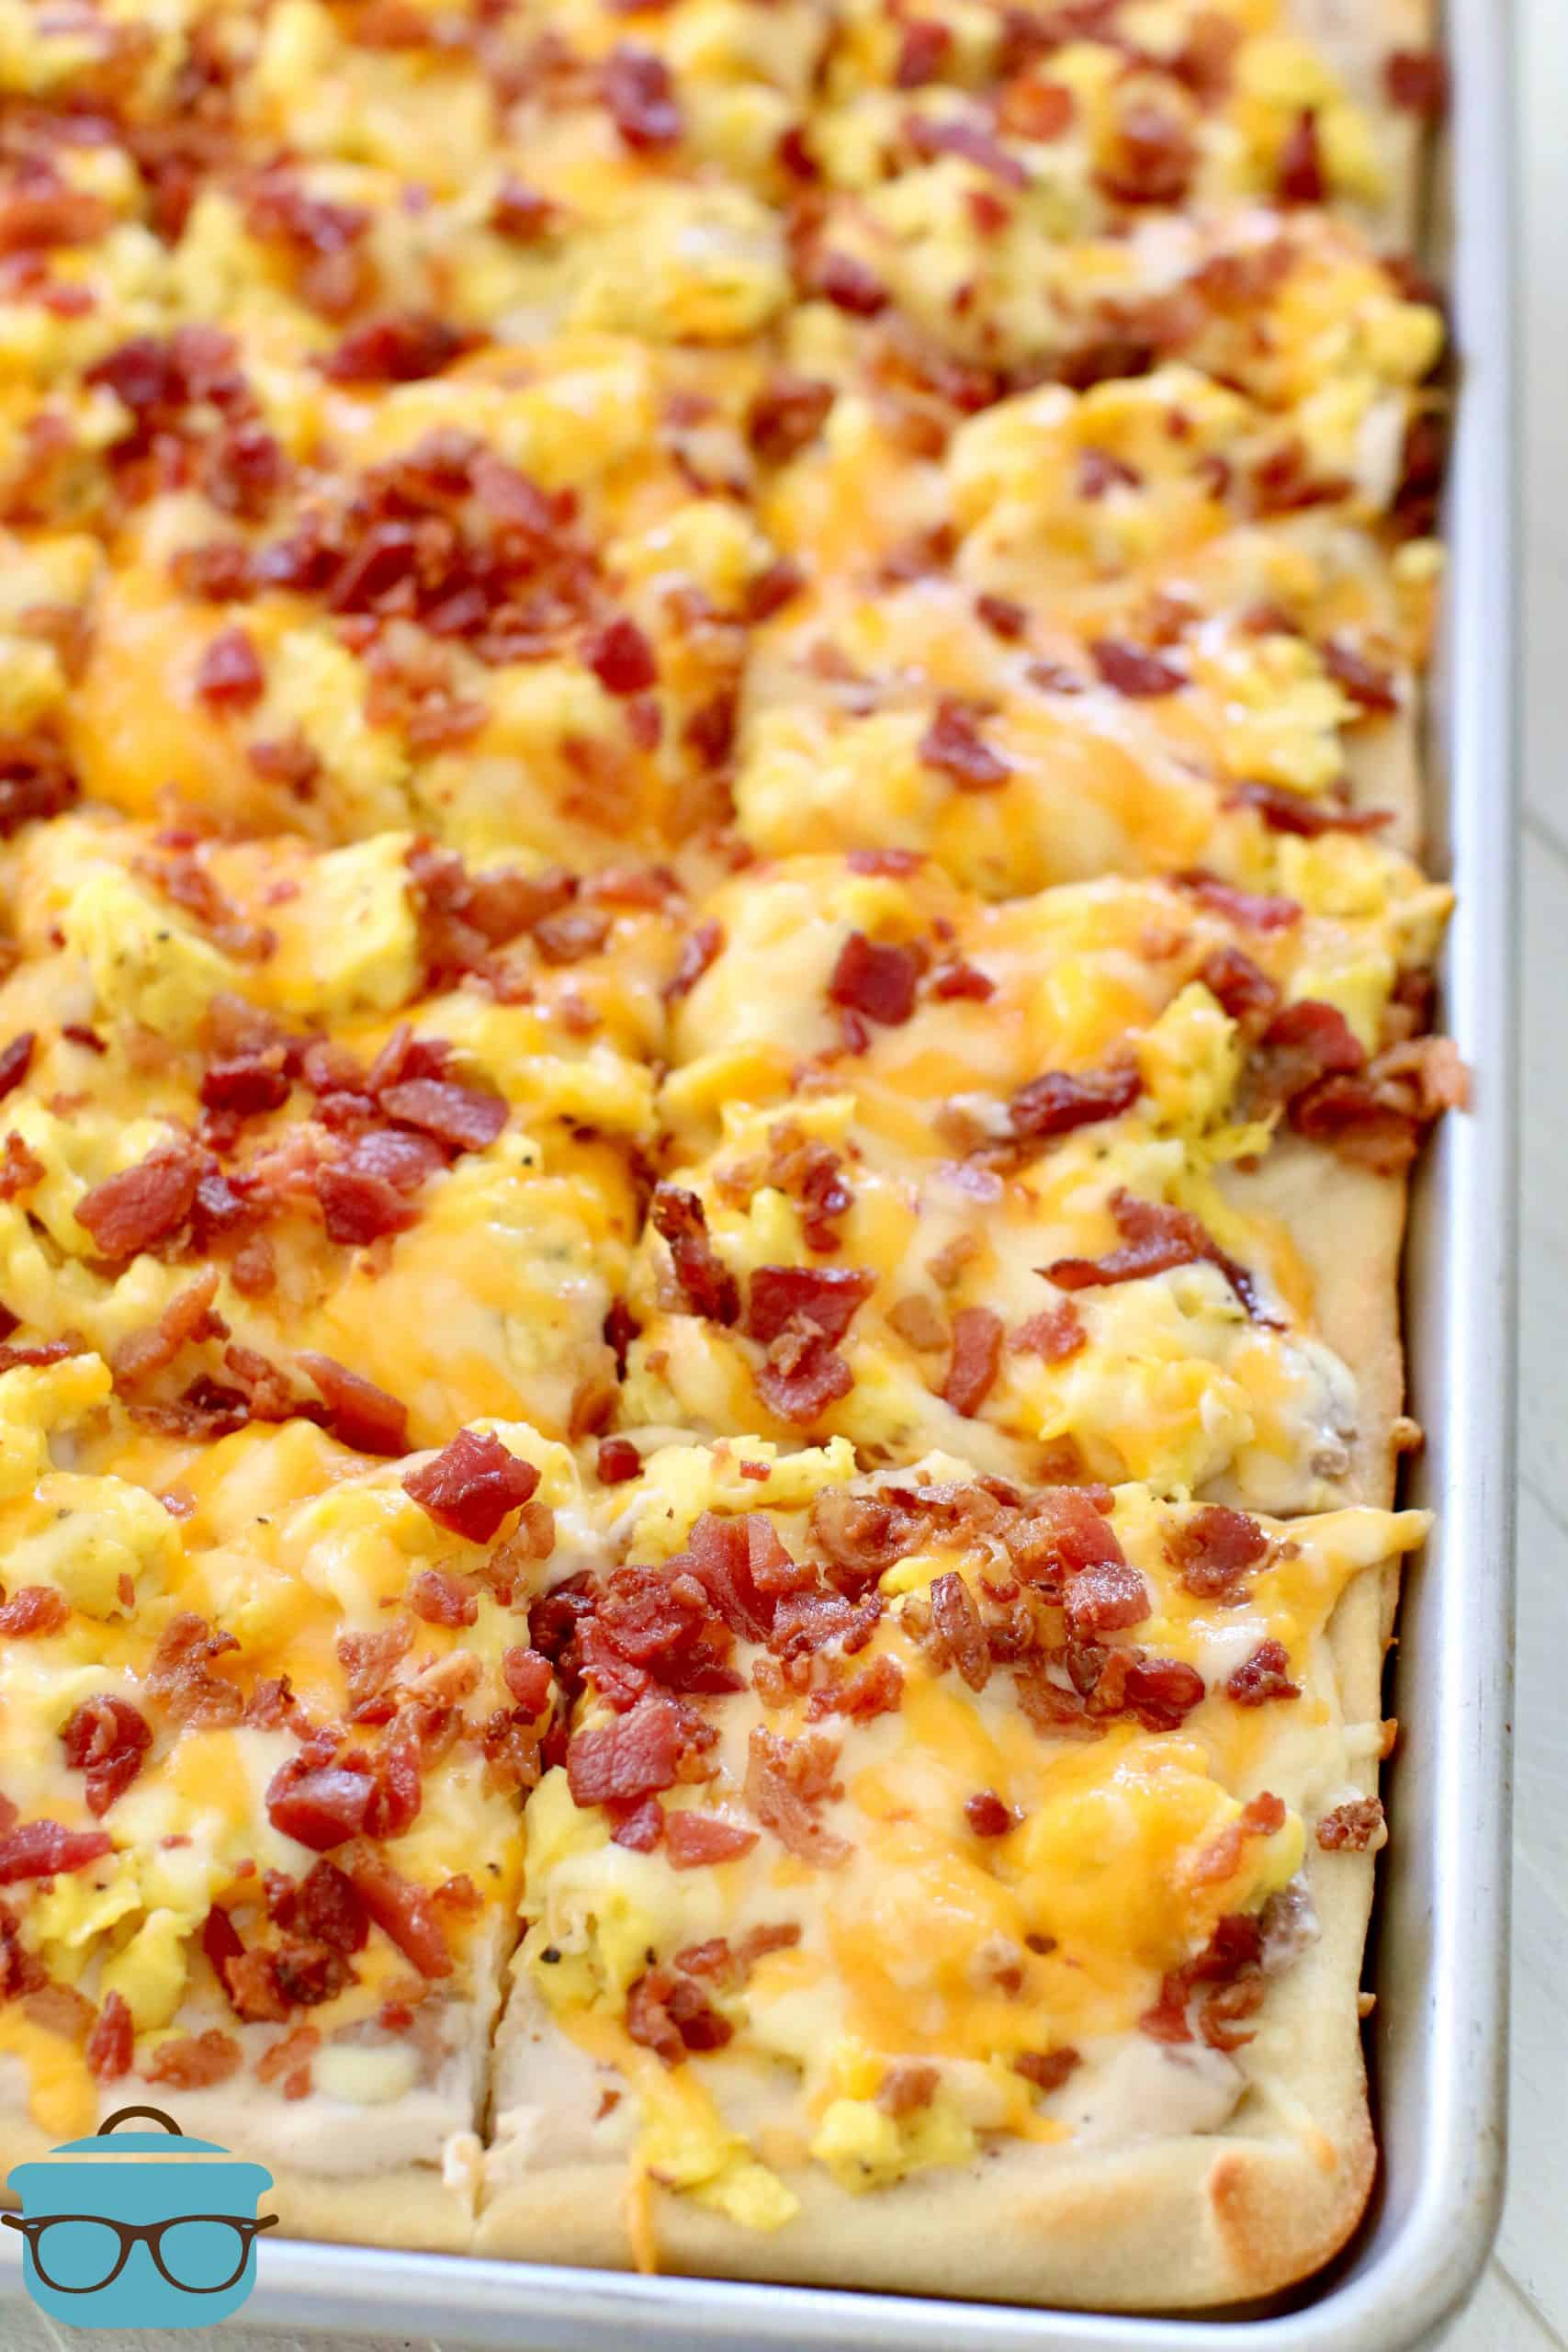 Fully cooked Breakfast Pizza shown sliced into squares in baking pan.